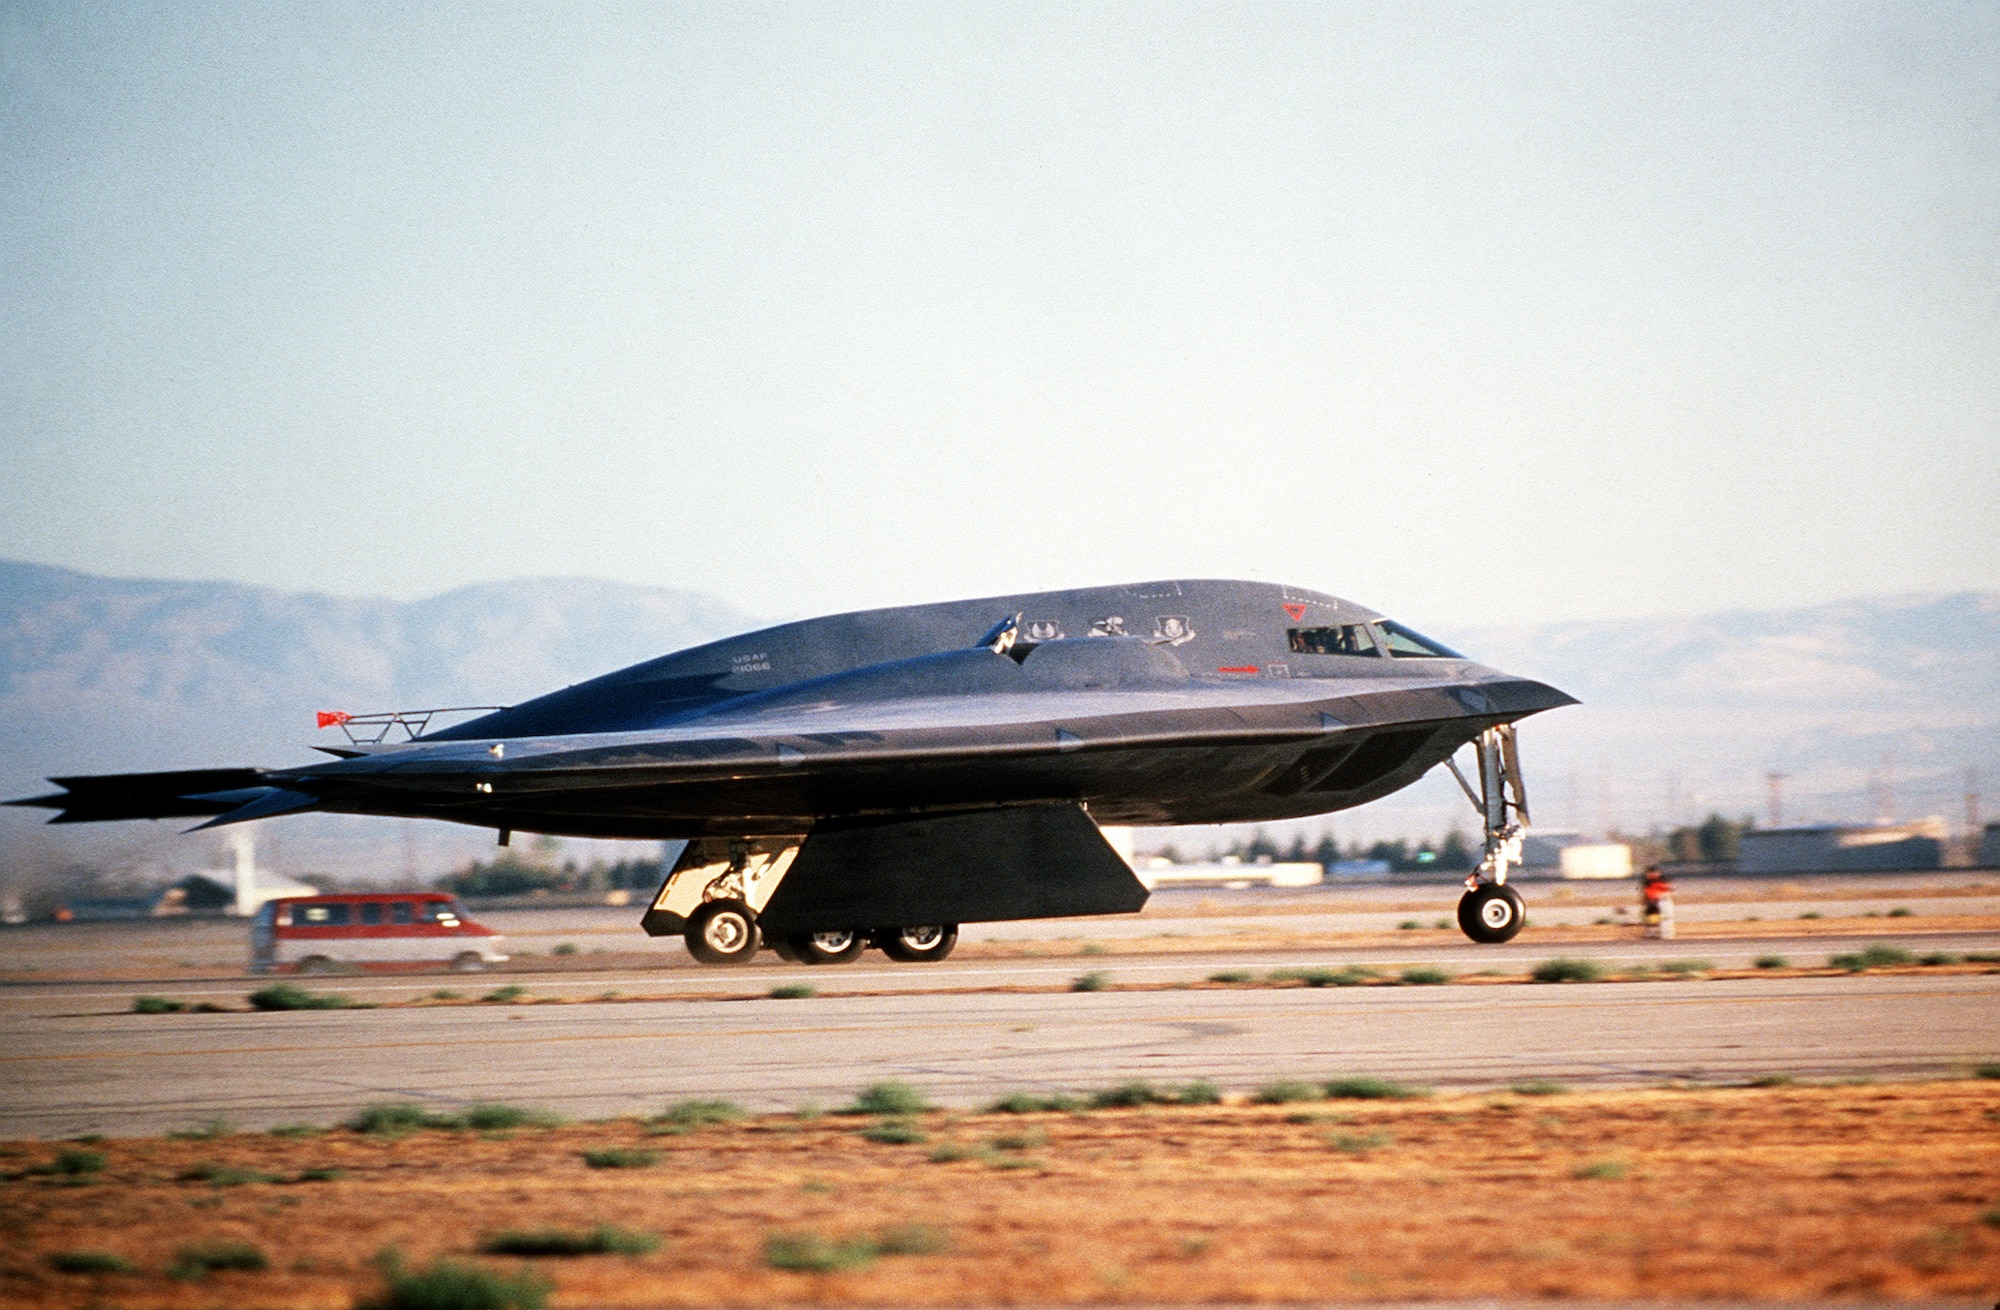 A B-2 Spirit bomber takes off July 17, 1989, from the Northrop Grumman production facility in Palmdale, California on its inaugural flight to Edwards Air Force Base, Calif. The B-2 would remain in the testing phase until 1993, when the first operational aircraft was delivered to Whiteman AFB, Mo. (Defense Imagery Management Operations Center)